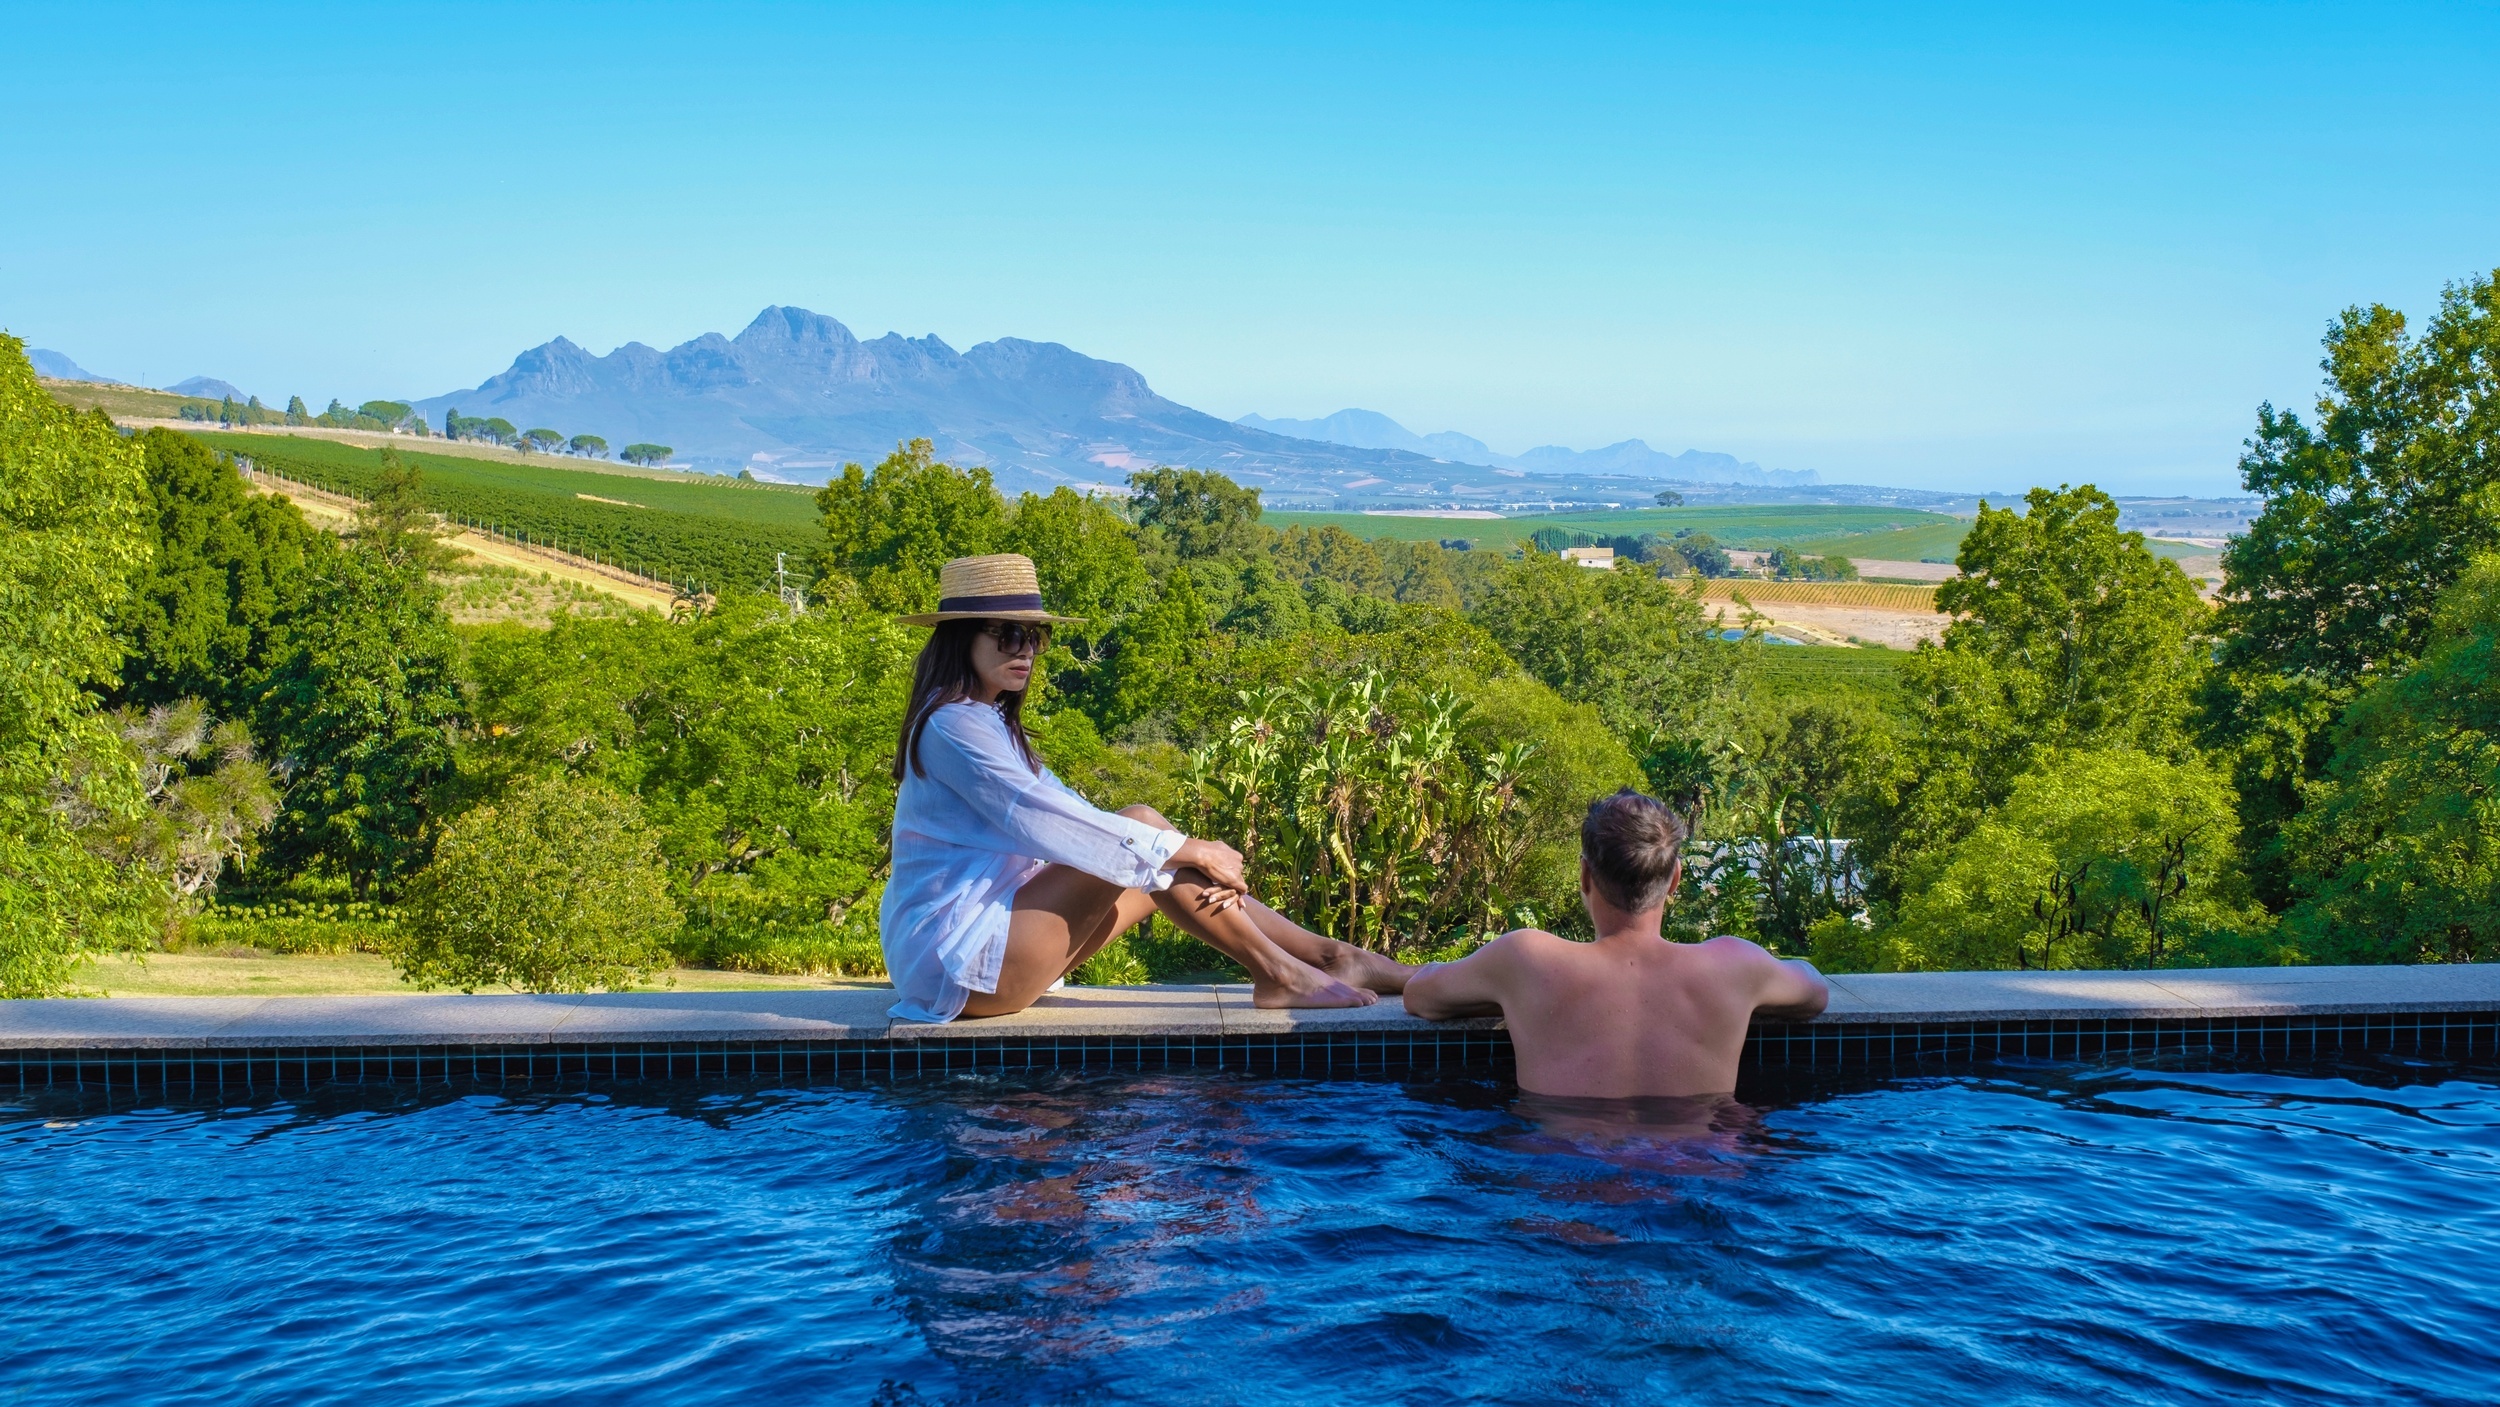 <p>South Africa is known for amazing wine, and if you plan a trip to Cape Town, you should tack on a day to the vineyards. Most are set amongst verdant mountains and have great facilities should you want to hang out for longer than just a tasting.</p><p><a href='https://www.msn.com/en-us/community/channel/vid-cj9pqbr0vn9in2b6ddcd8sfgpfq6x6utp44fssrv6mc2gtybw0us'>Follow us on MSN to see more of our exclusive lifestyle content.</a></p>